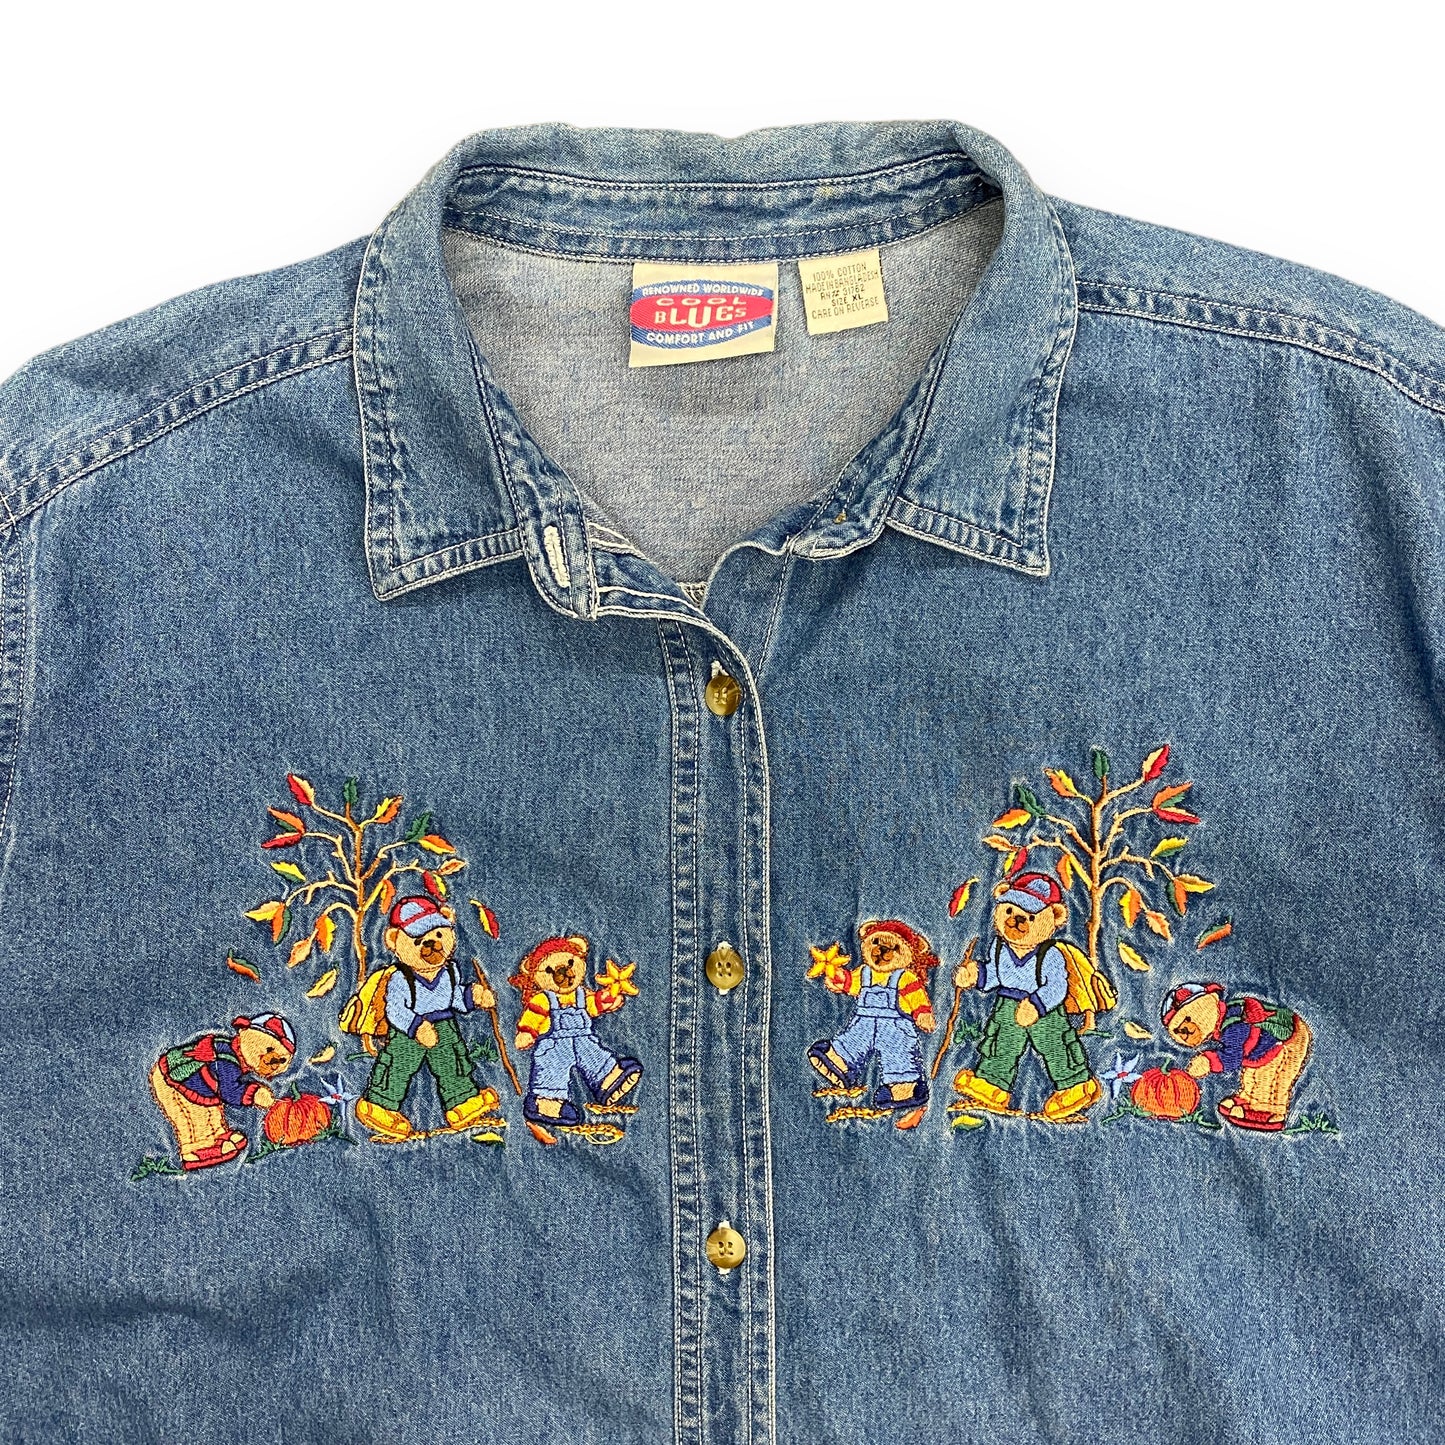 1990s Embroidered Bear Family Denim Button Up Shirt - Size Large